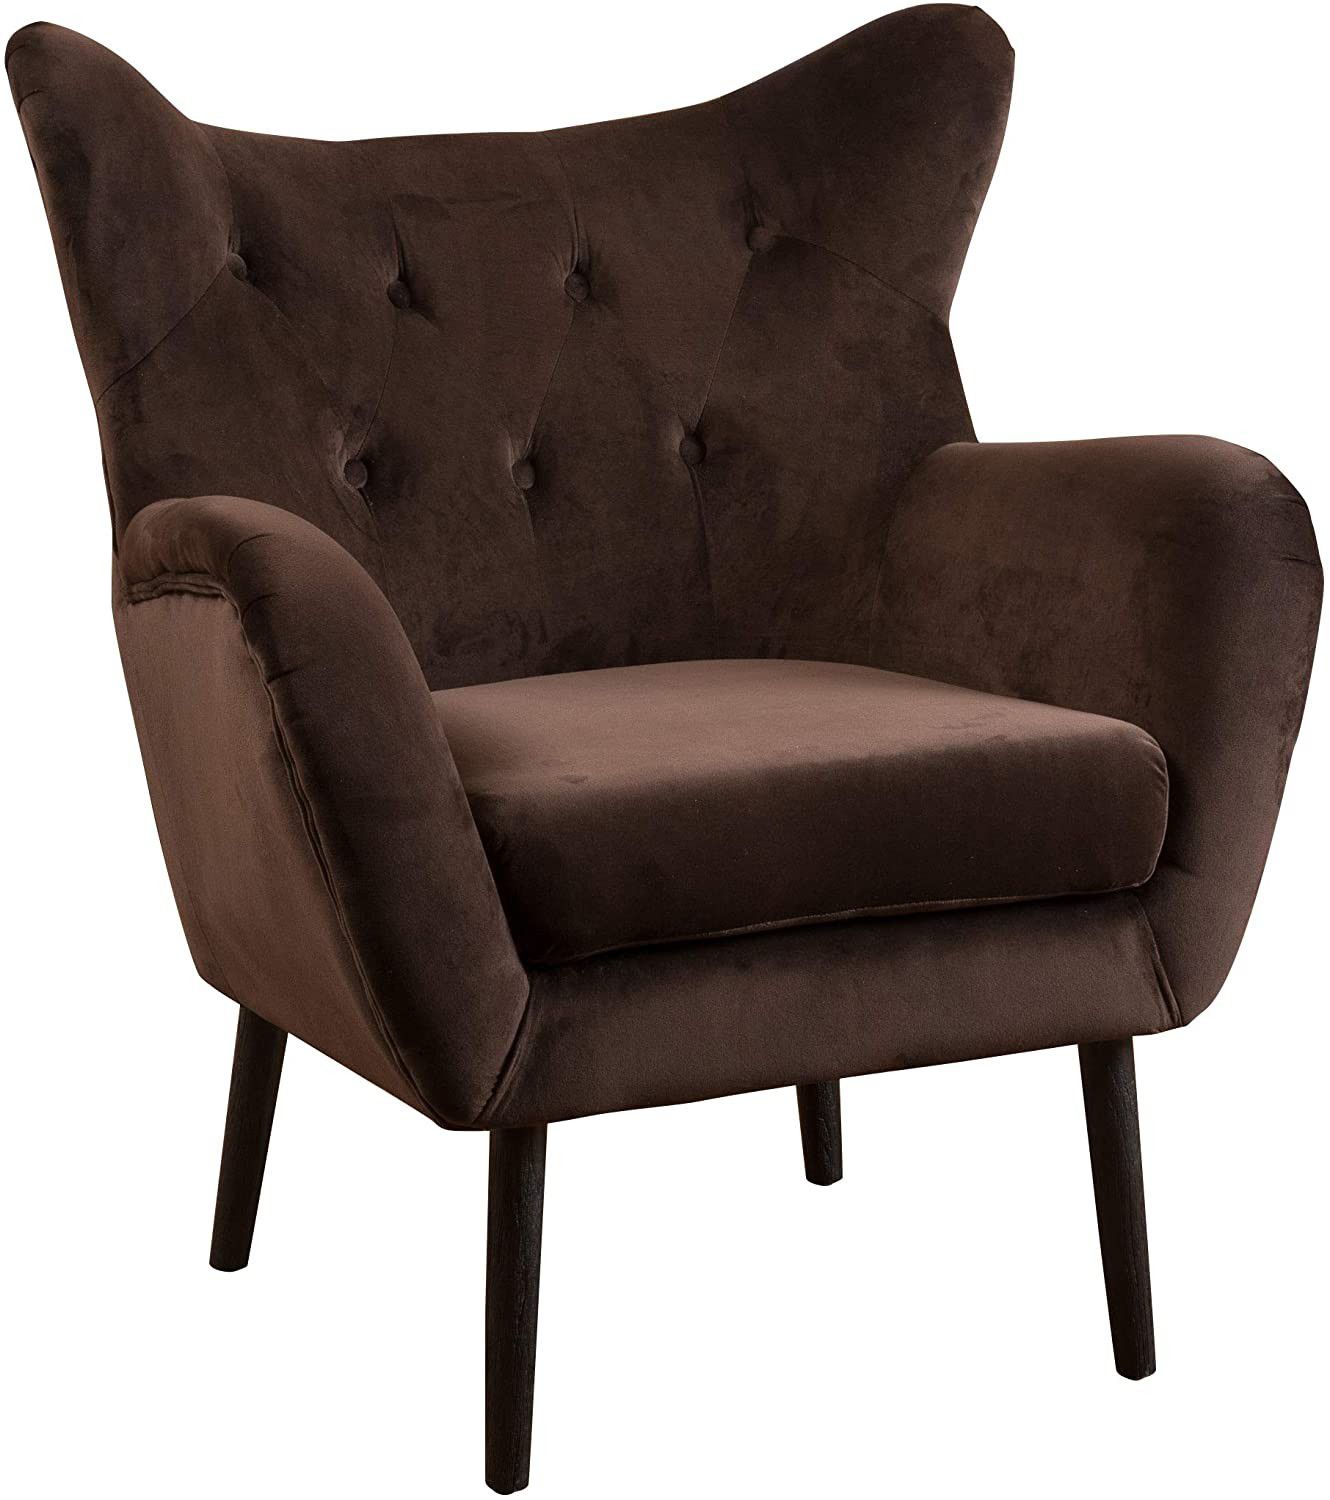 Classy Arm Chair, Velvet Fabric and Wood, Coffee